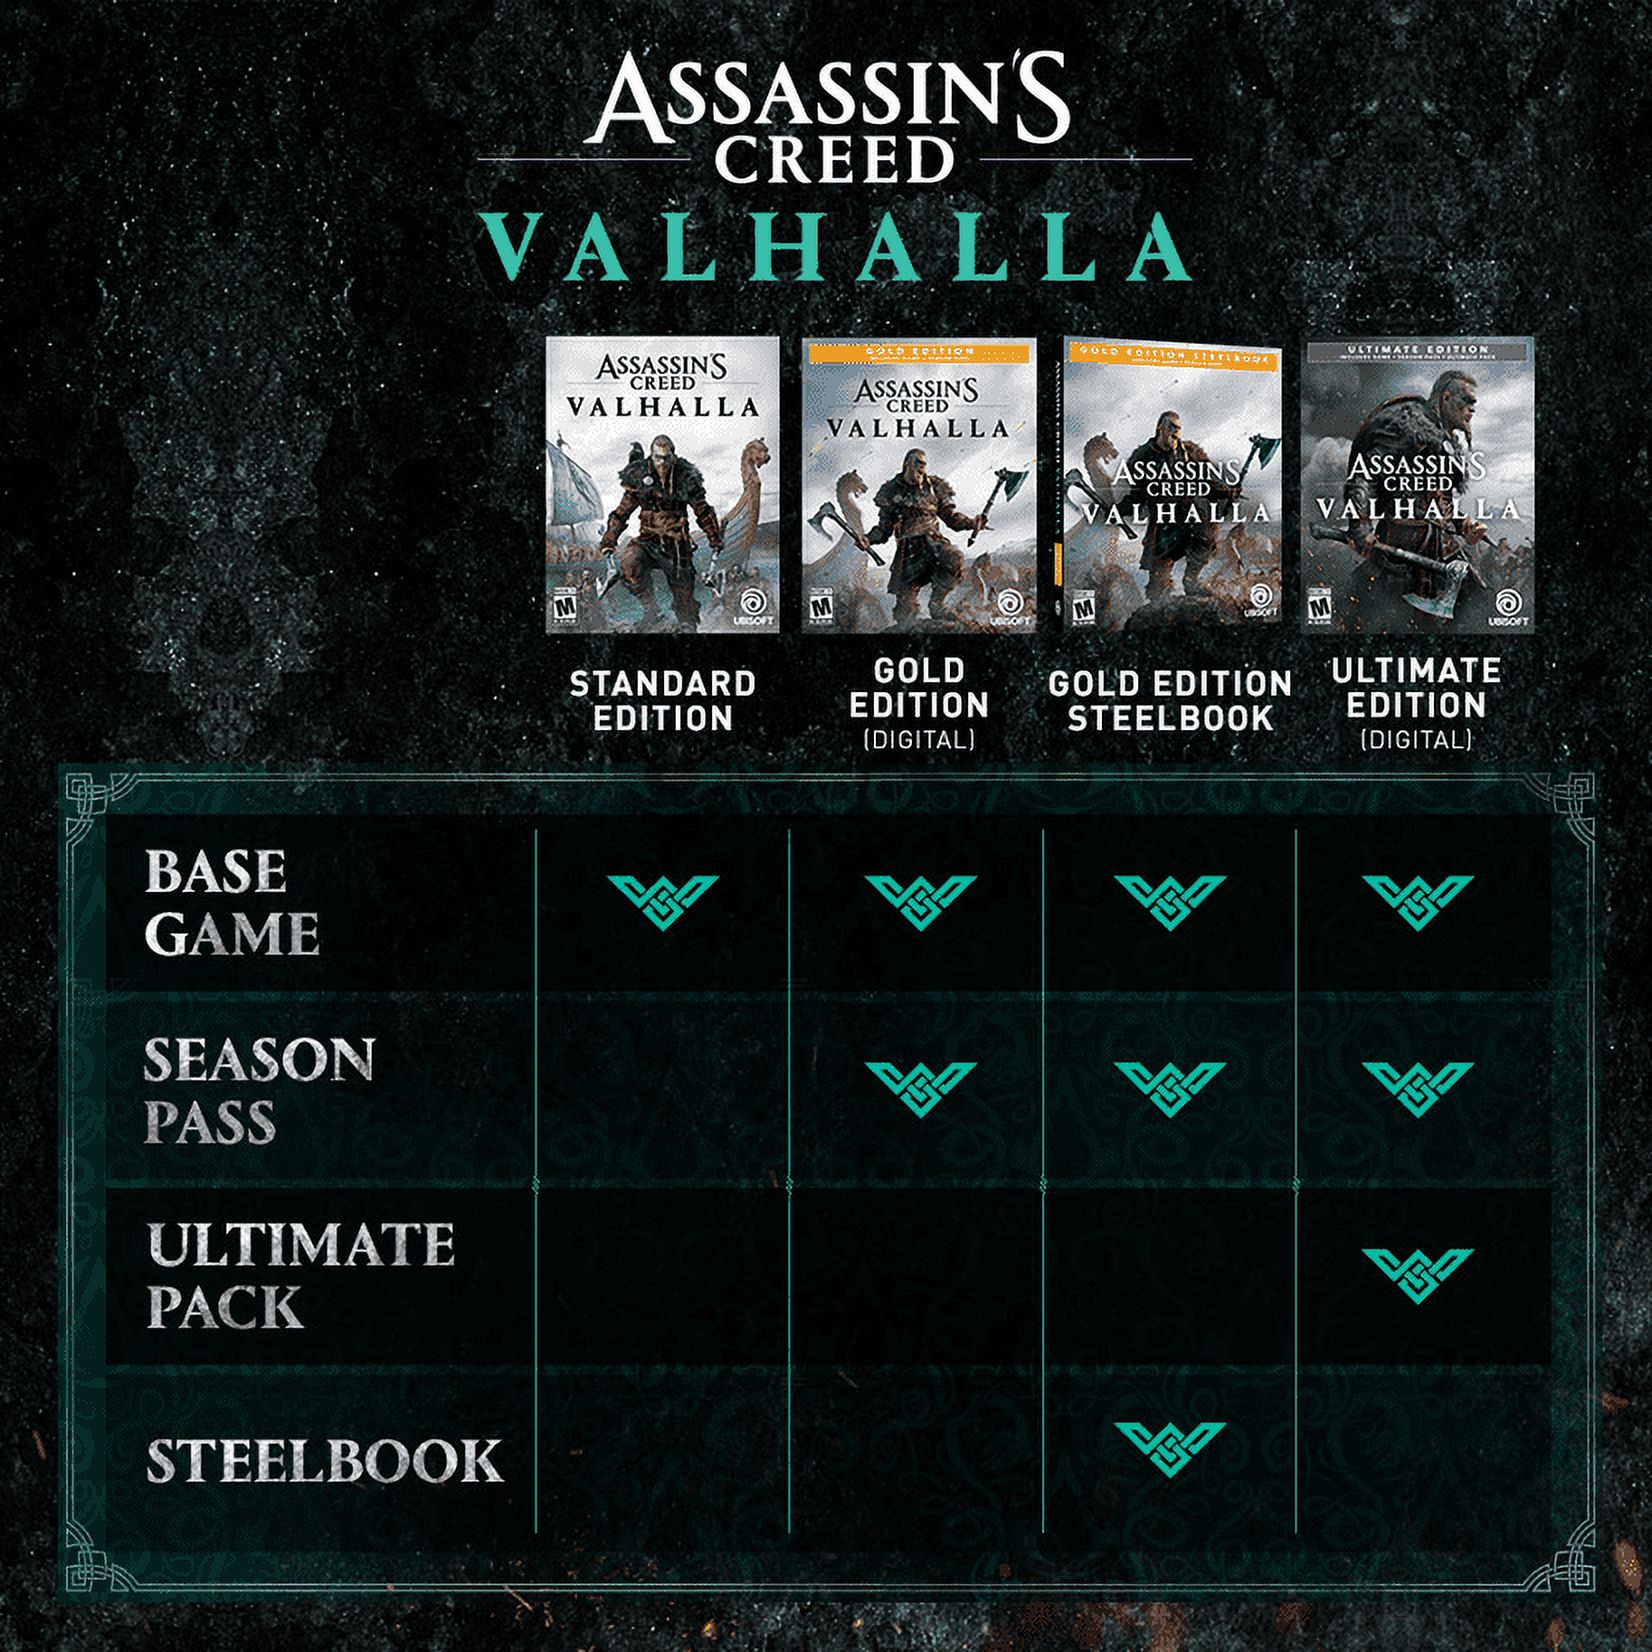 Assassin's Creed Valhalla PlayStation 4 Standard Edition with free upgrade to the digital PS5 version - image 2 of 6